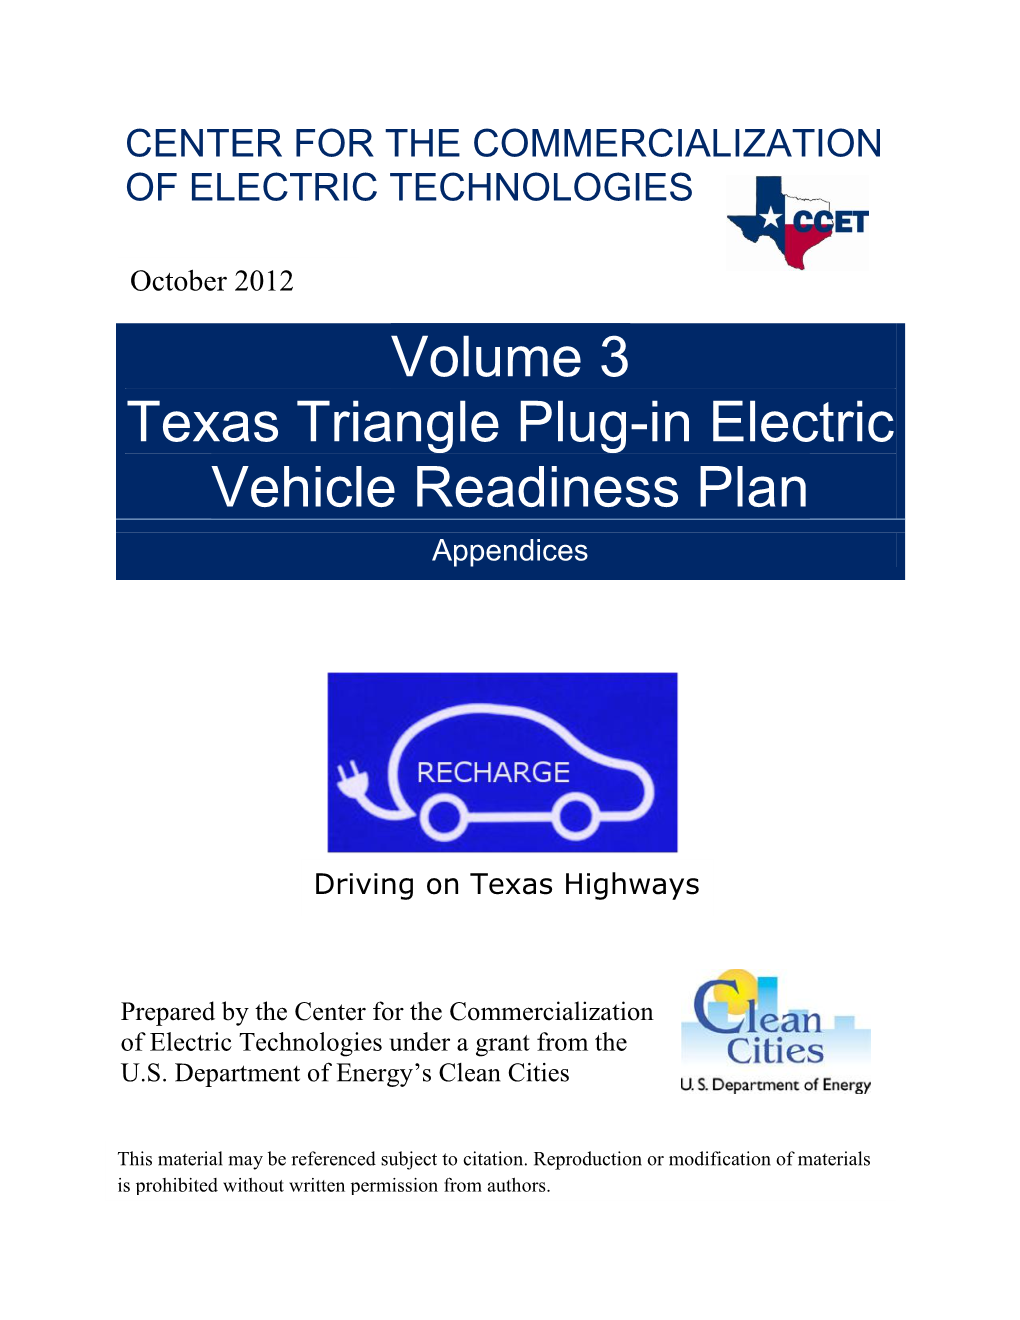 Volume 3 Texas Triangle Plug-In Electric Vehicle Readiness Plan Appendices